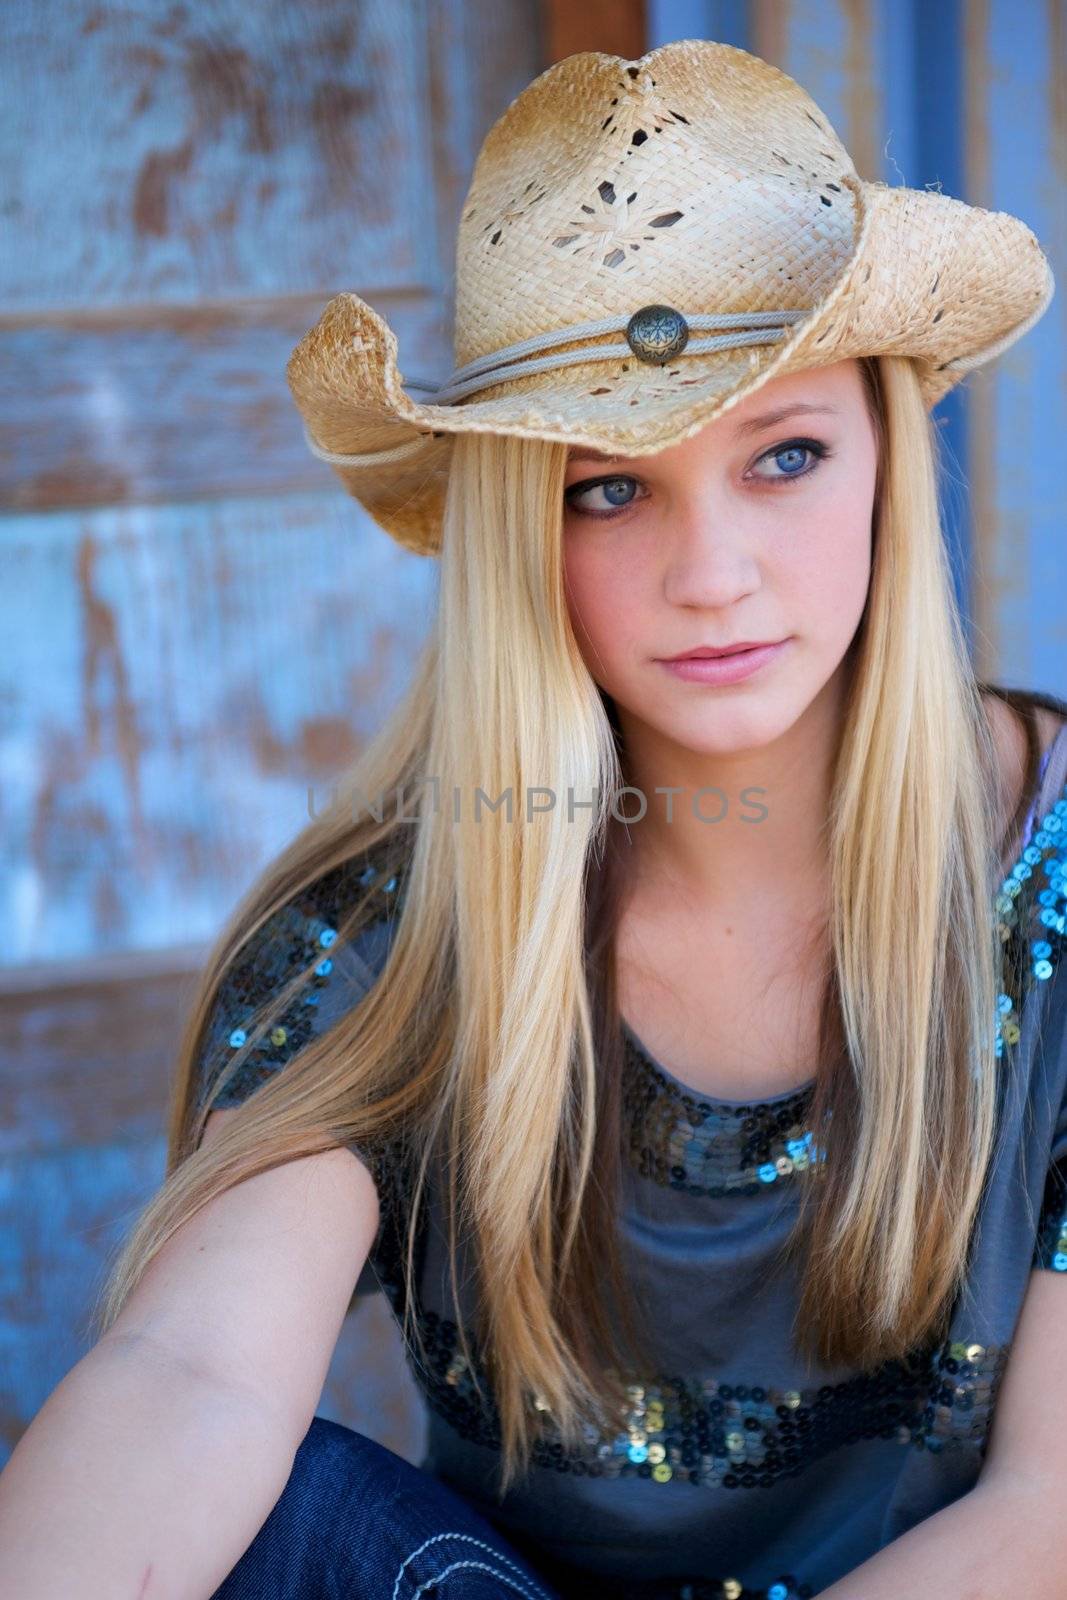 Teen Blond Model with Cowboy Hat and Blue Eyes by pixelsnap